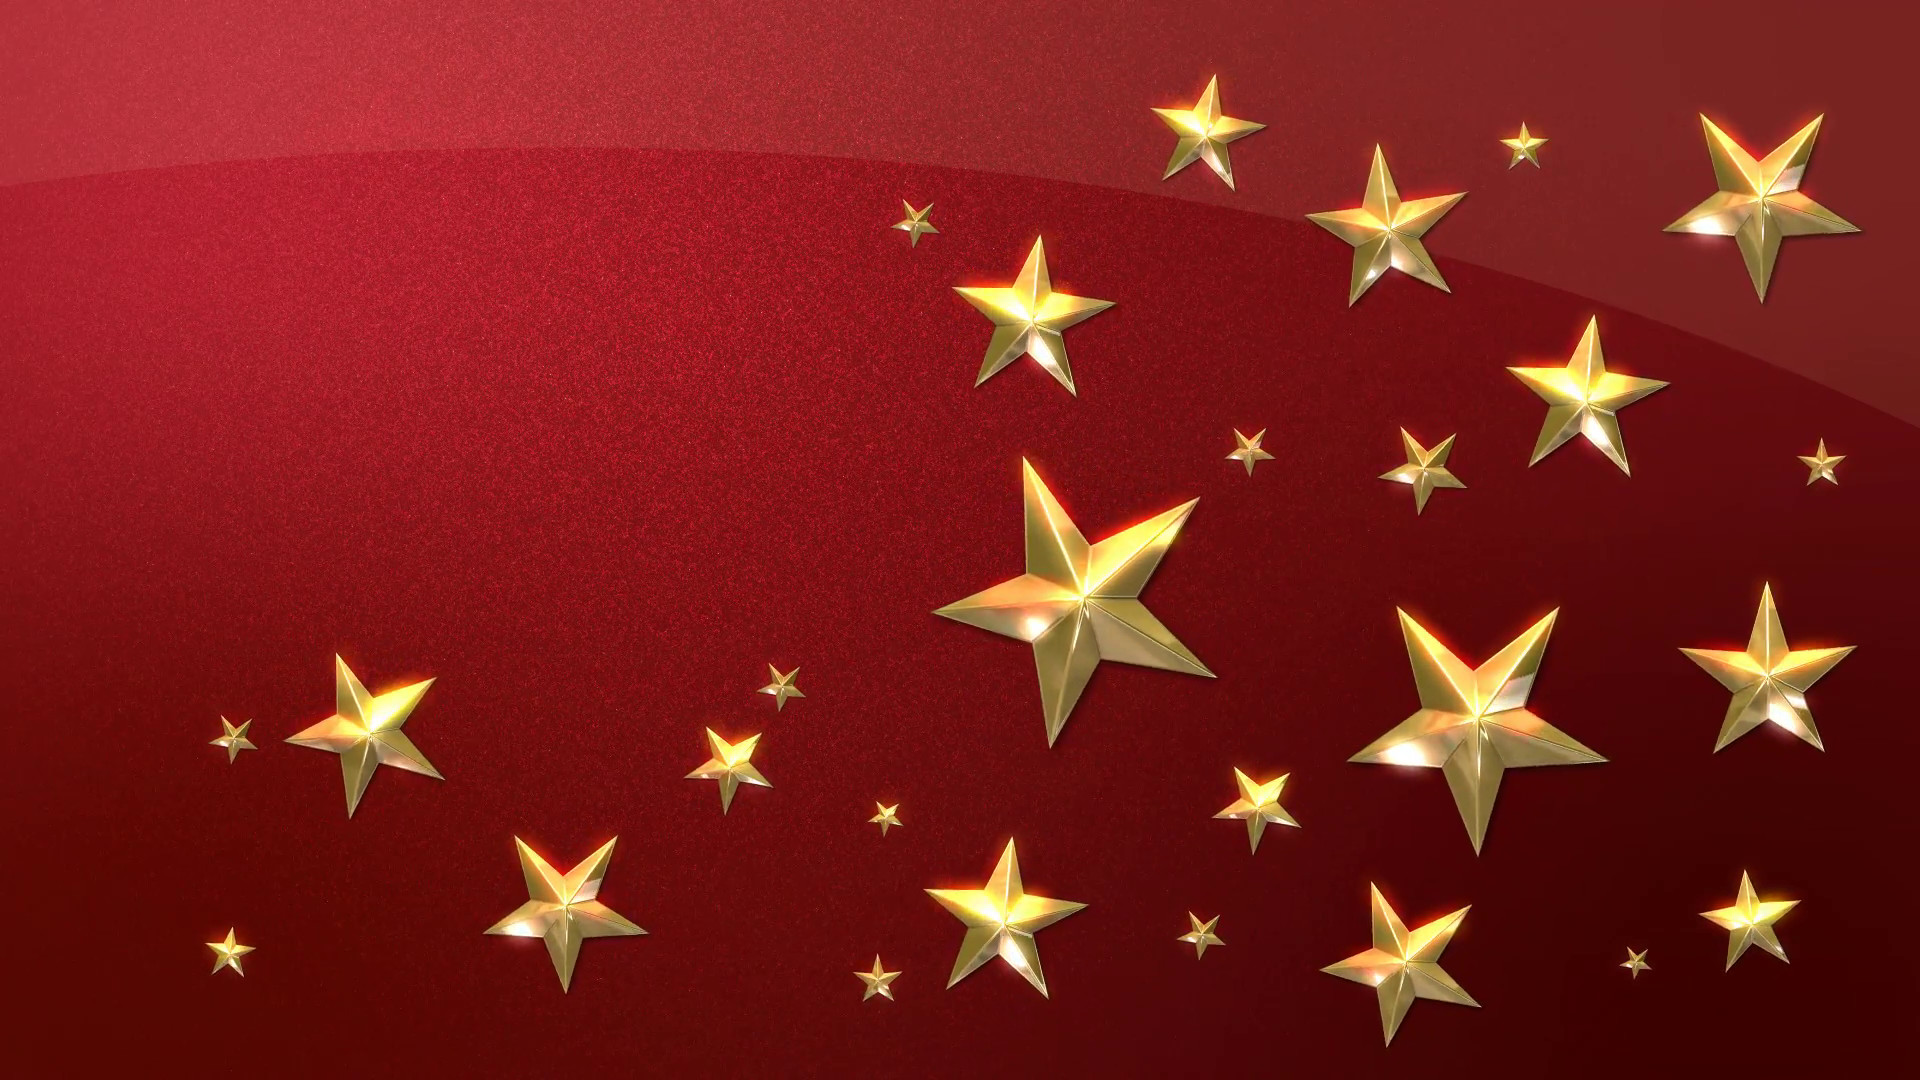 1920x1080 Looping Animation of Festive Gold Stars on a Sparkling Red Background  Motion Background - VideoBlocks